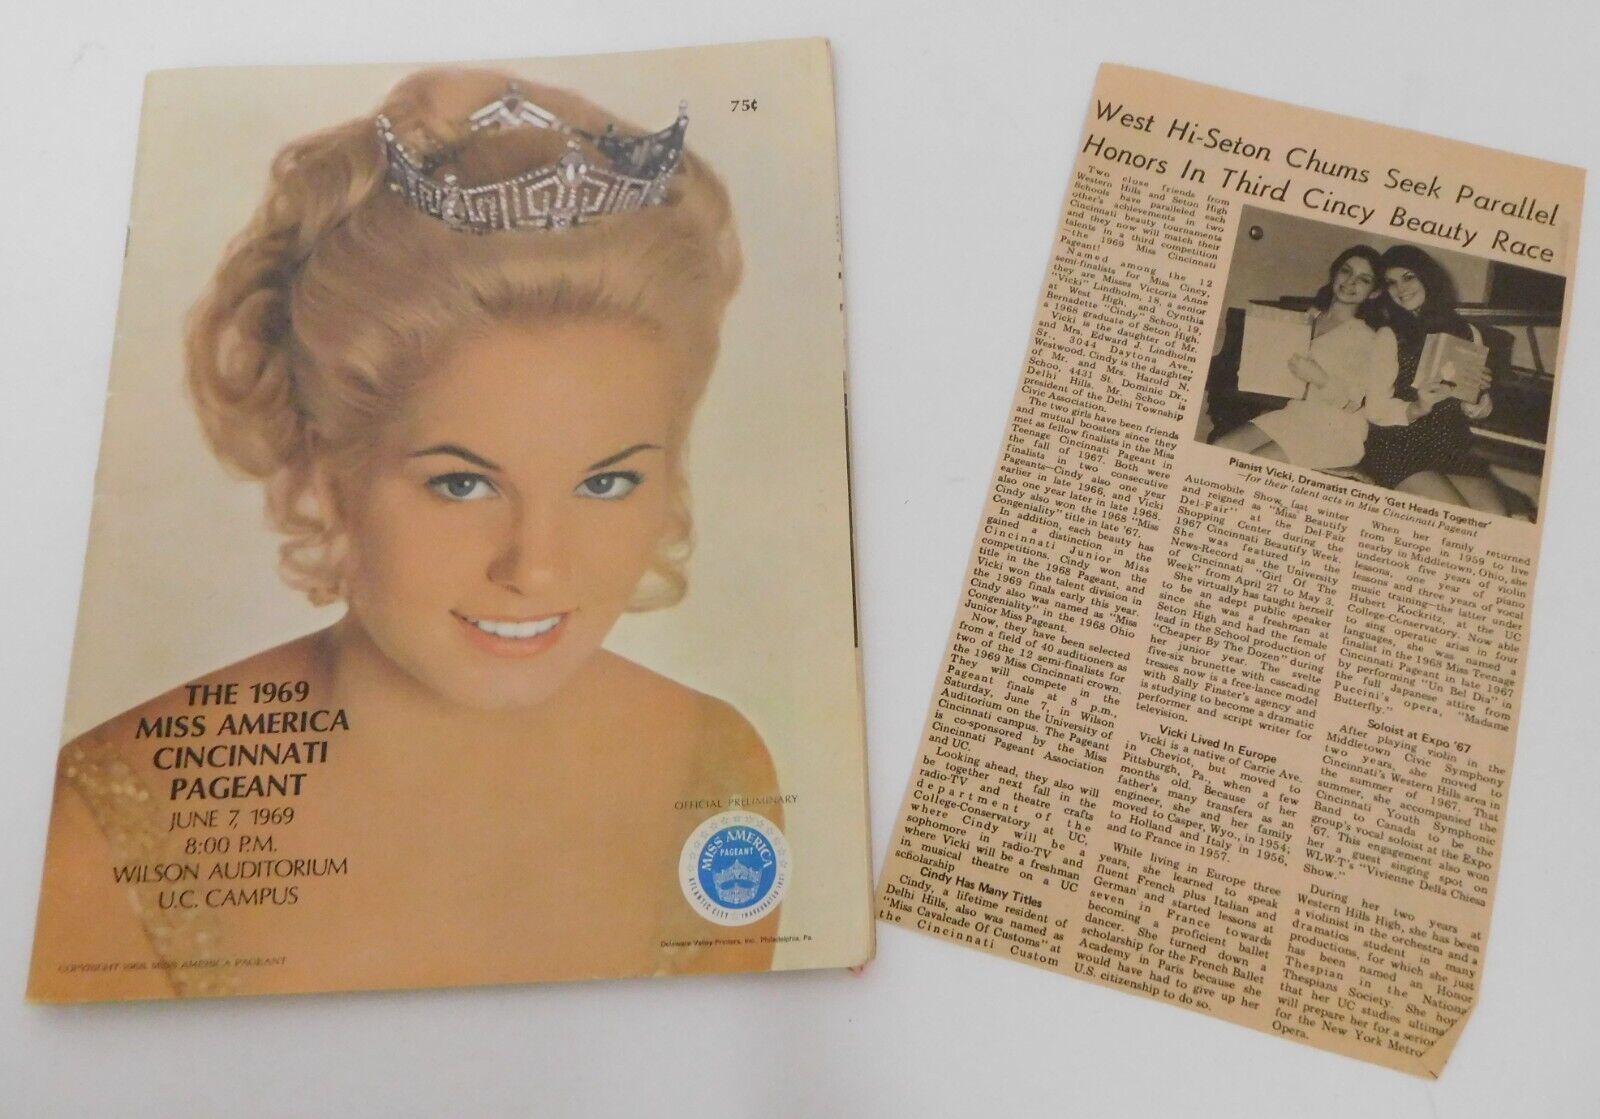 The 1969 Miss America Cincinnati Pageant Official Program & Clipping